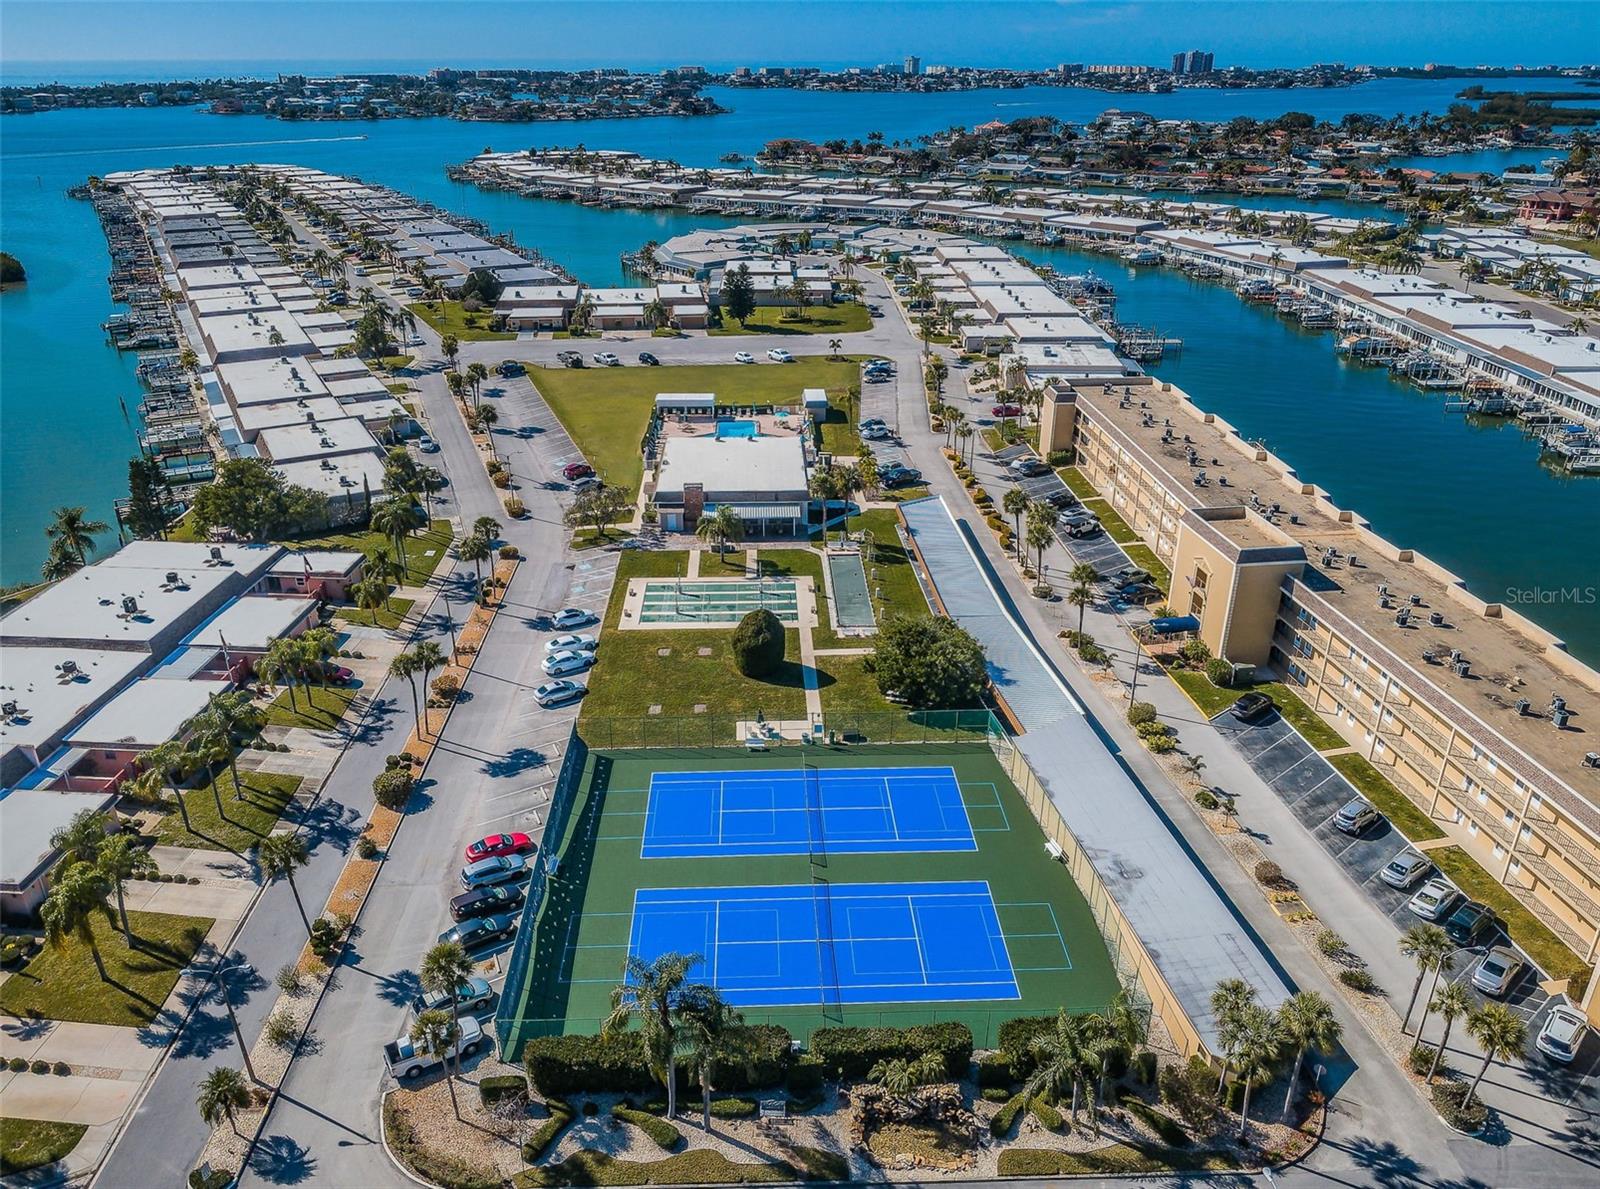 Aerial view of tennis courts, clubhouse, shuffleboard and pool